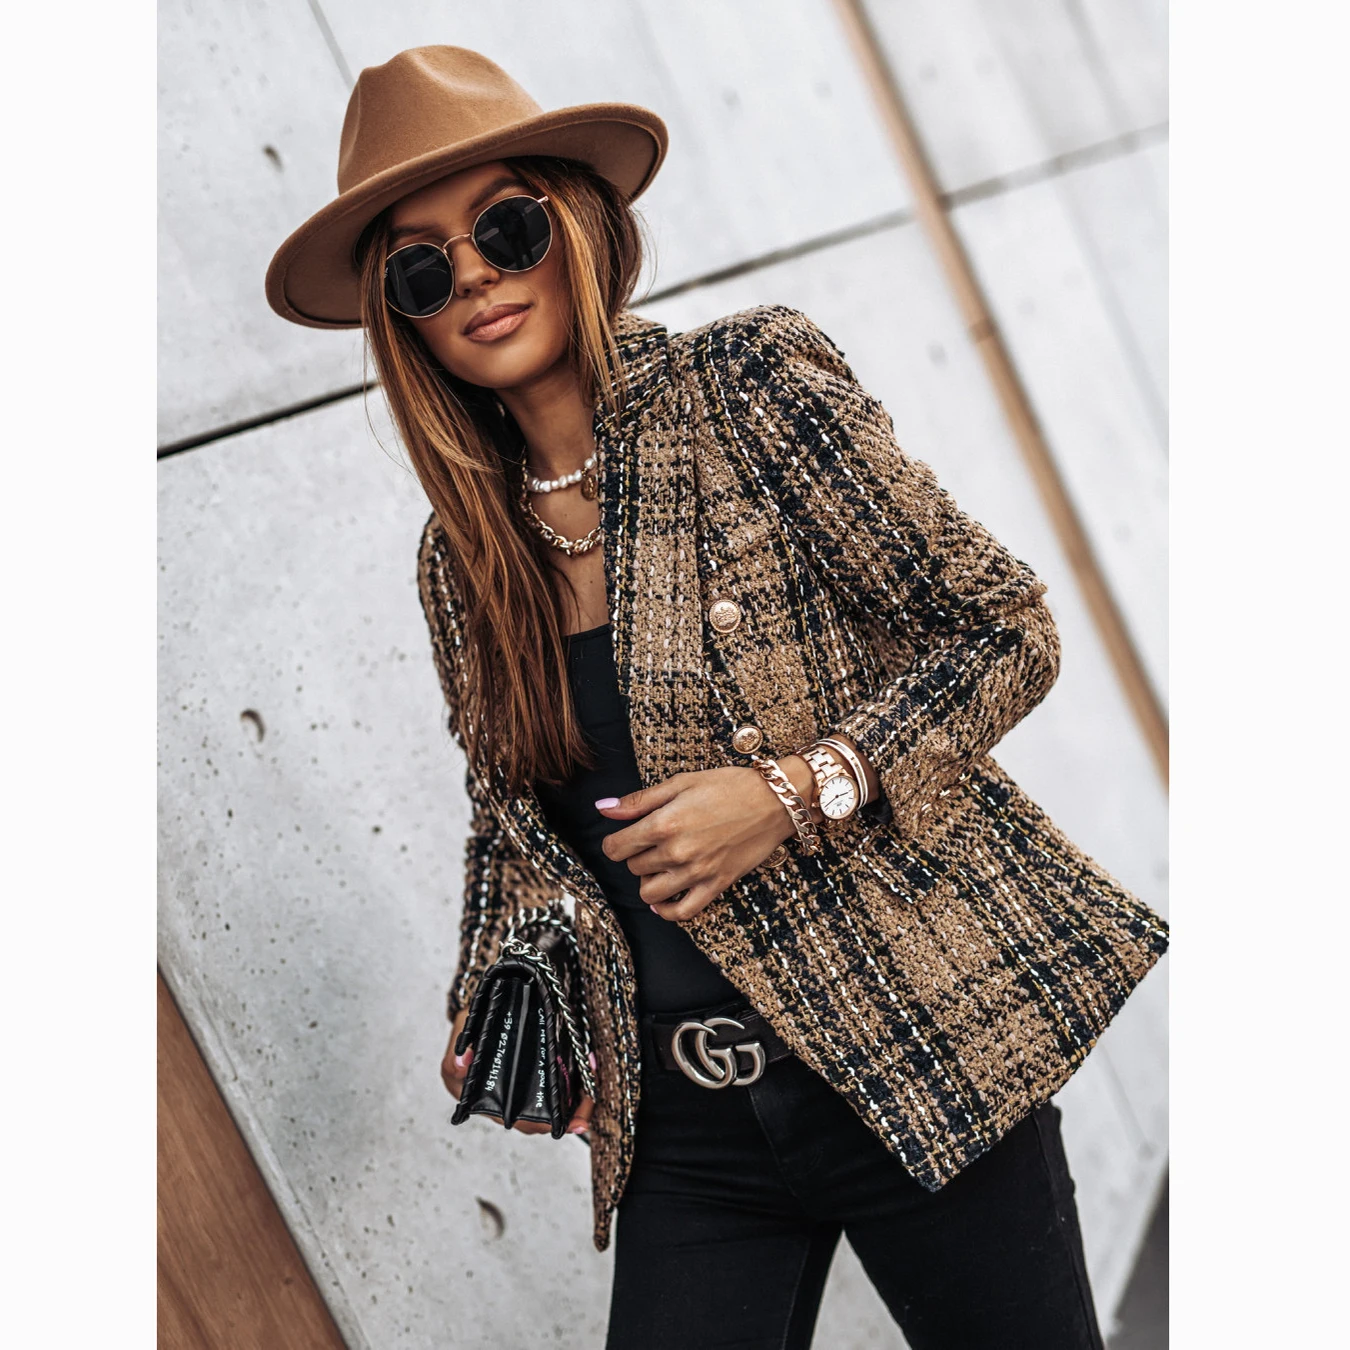 

Stylish long sleeve casual coat female outerwear tops checked women blazer jacket ladies blazers plus size coats, 4colors